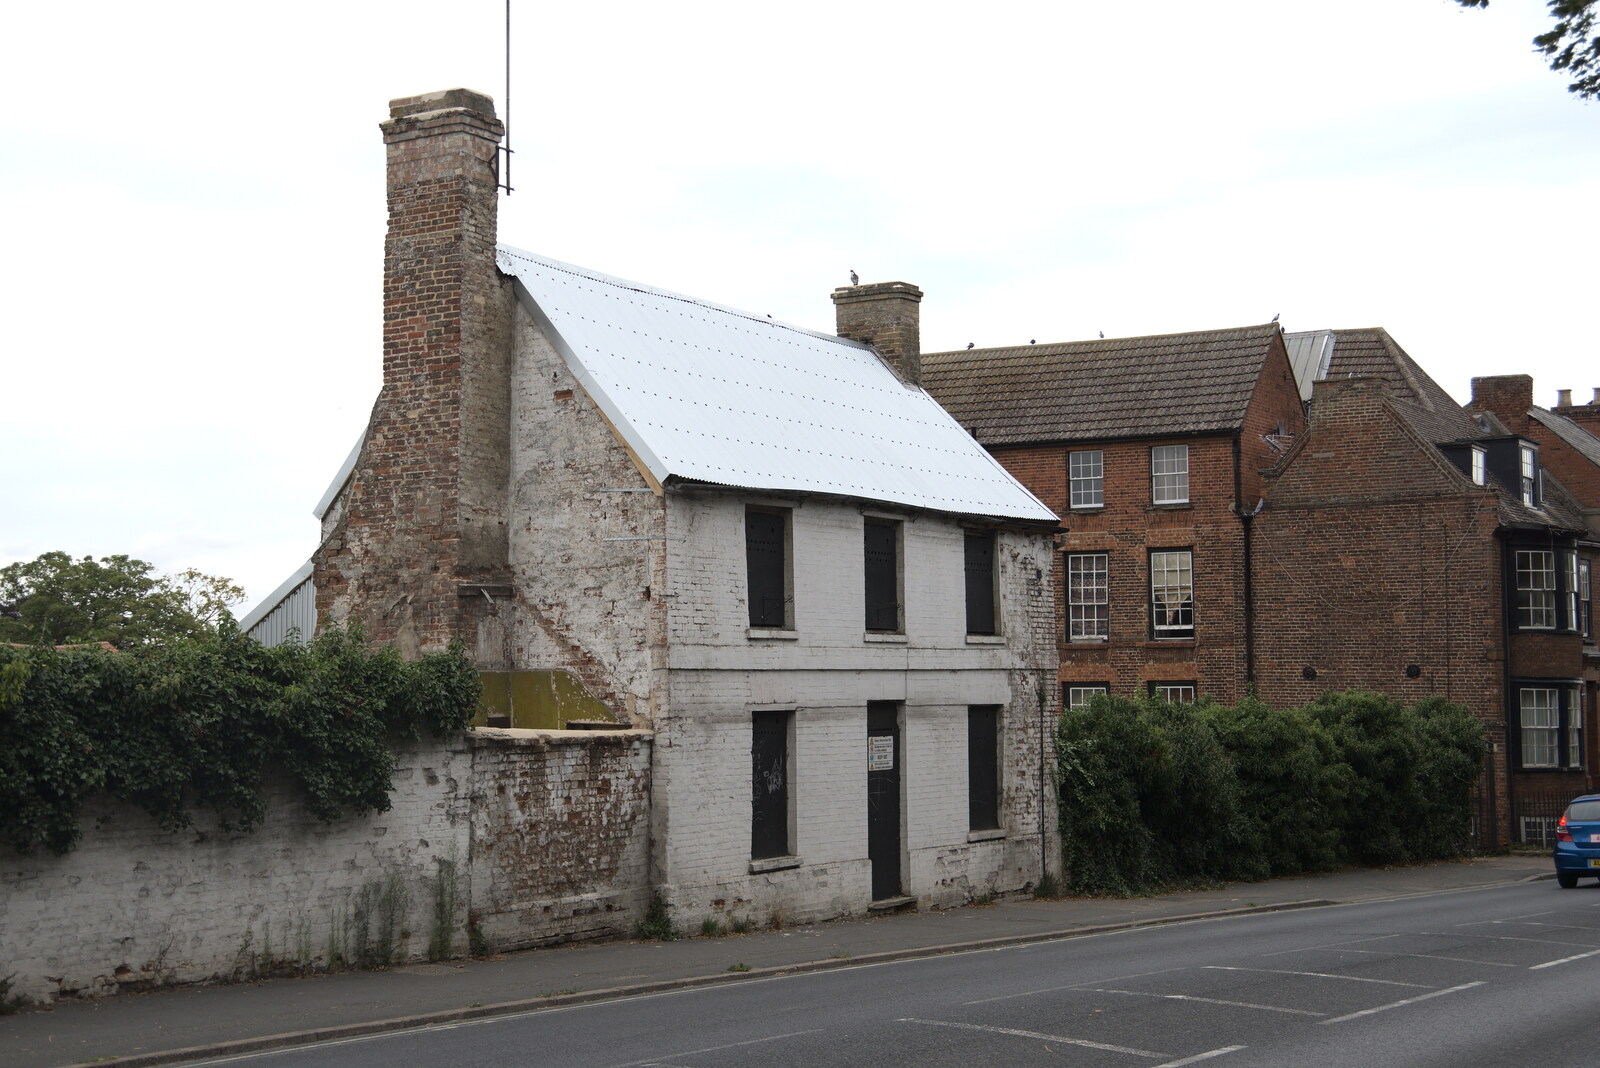 Another derelict house in Newmarket from Petay's Wedding Reception, Fanhams Hall, Ware, Hertfordshire - 20th August 2021